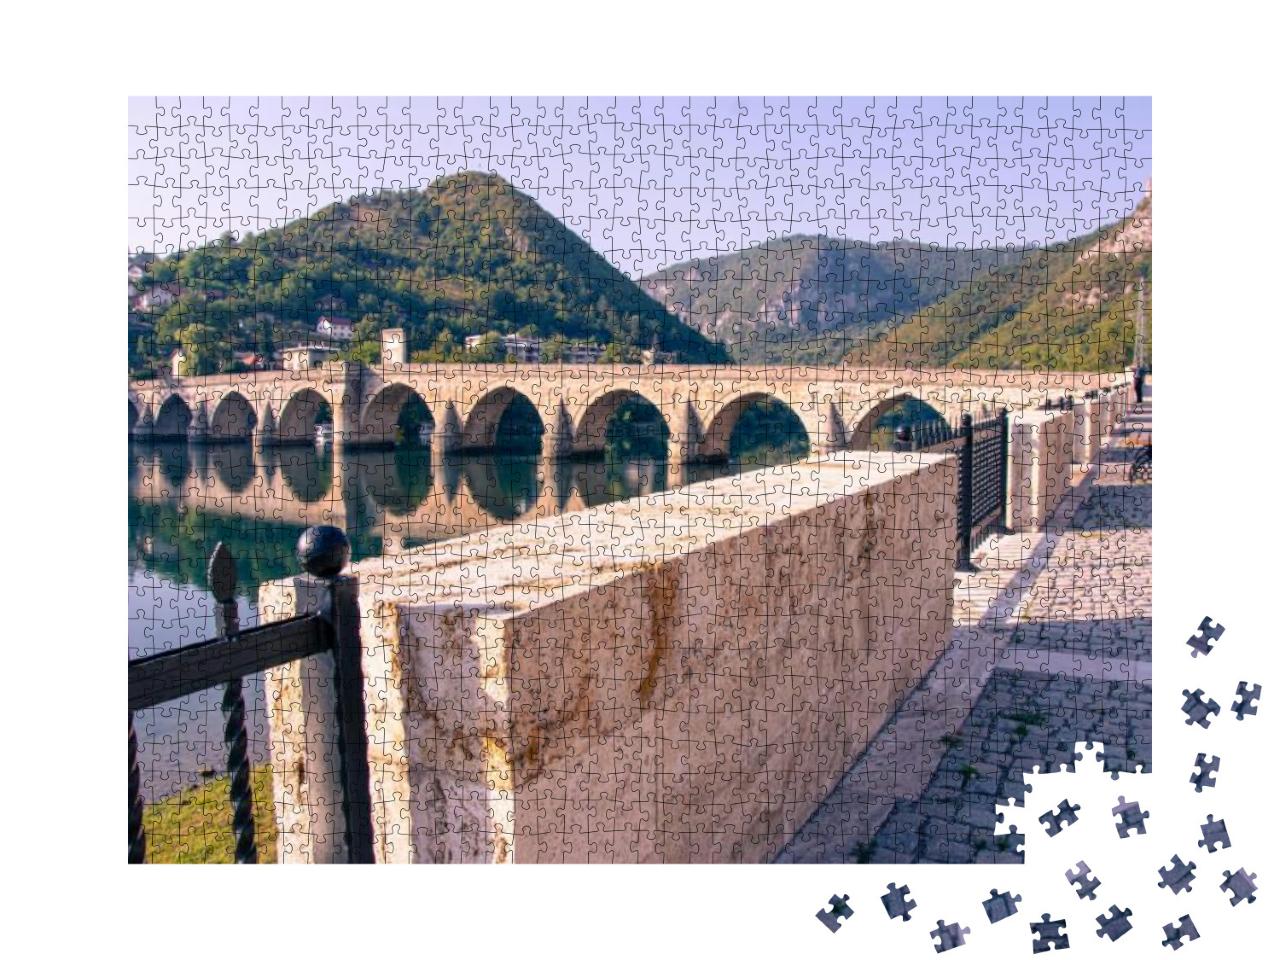 Bridge Over Drina River in Bosnia... Jigsaw Puzzle with 1000 pieces